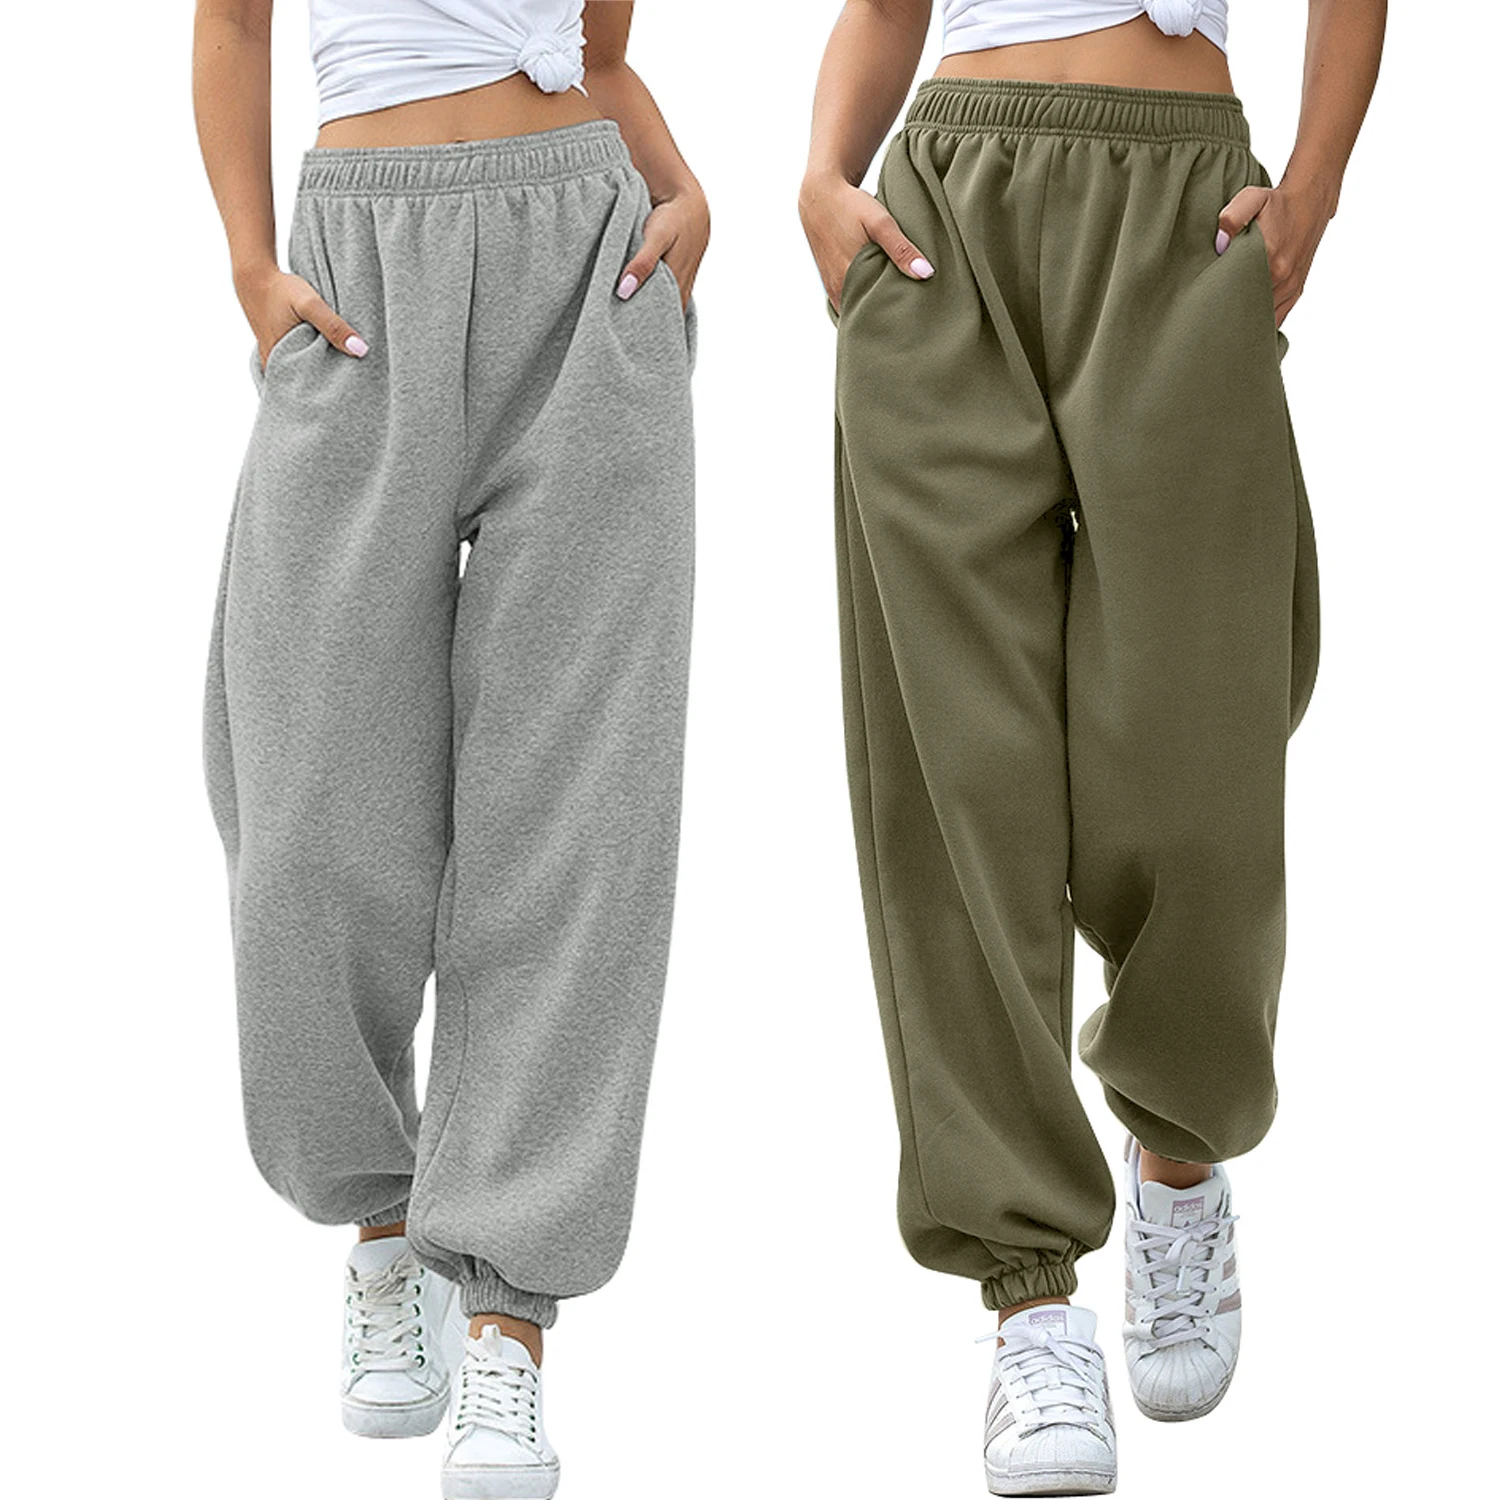 

High Quality Fashion Solid Grey Casual Baggy Jogger Sweatpants Women, Green, black, gray